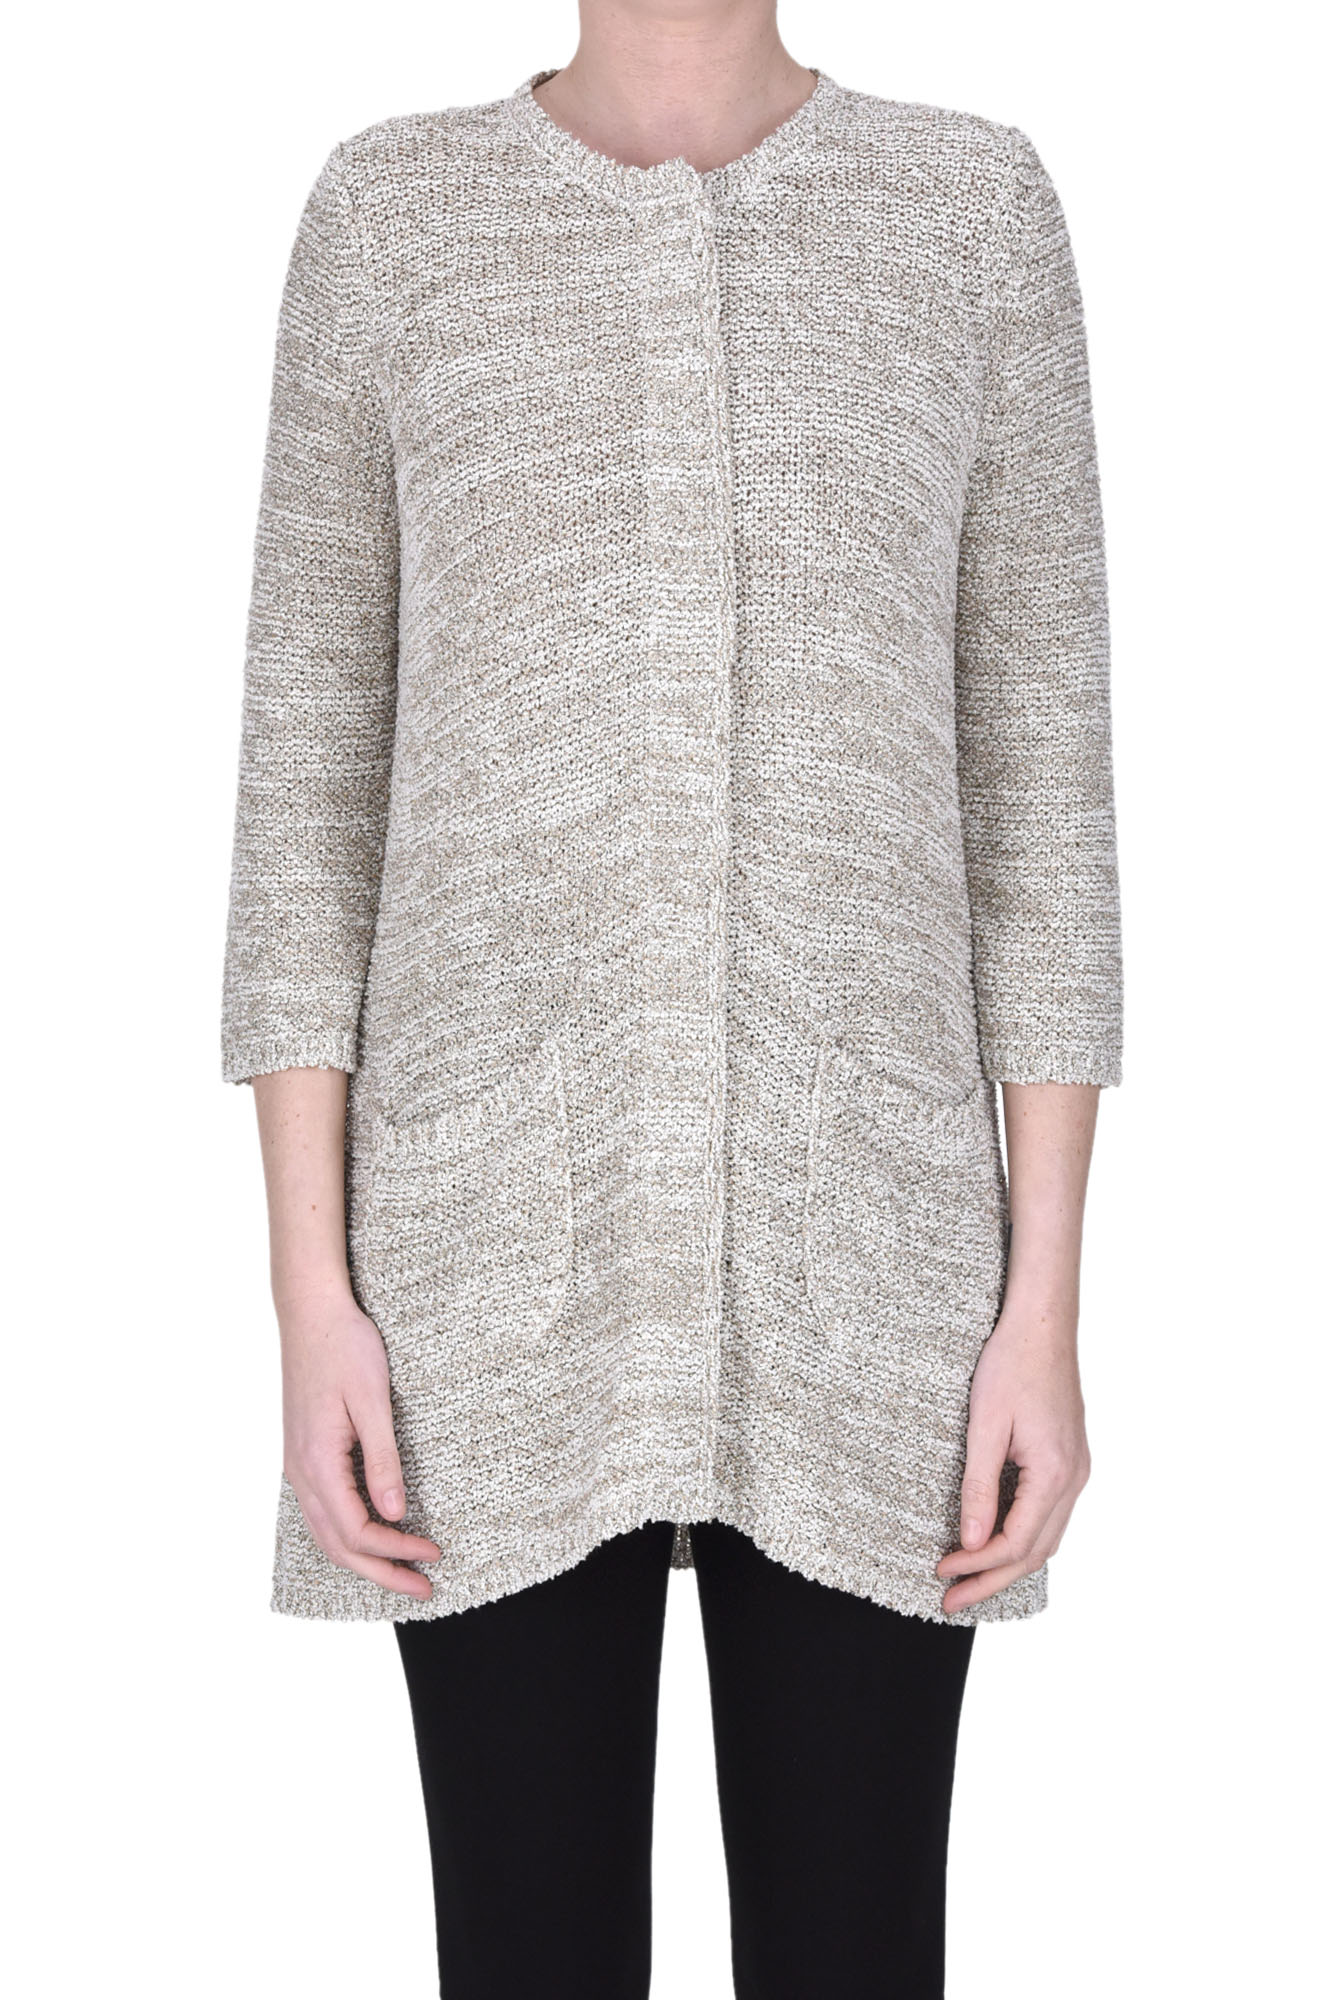 Shop Anneclaire Chanel Style Cardigan Jacket In Beige